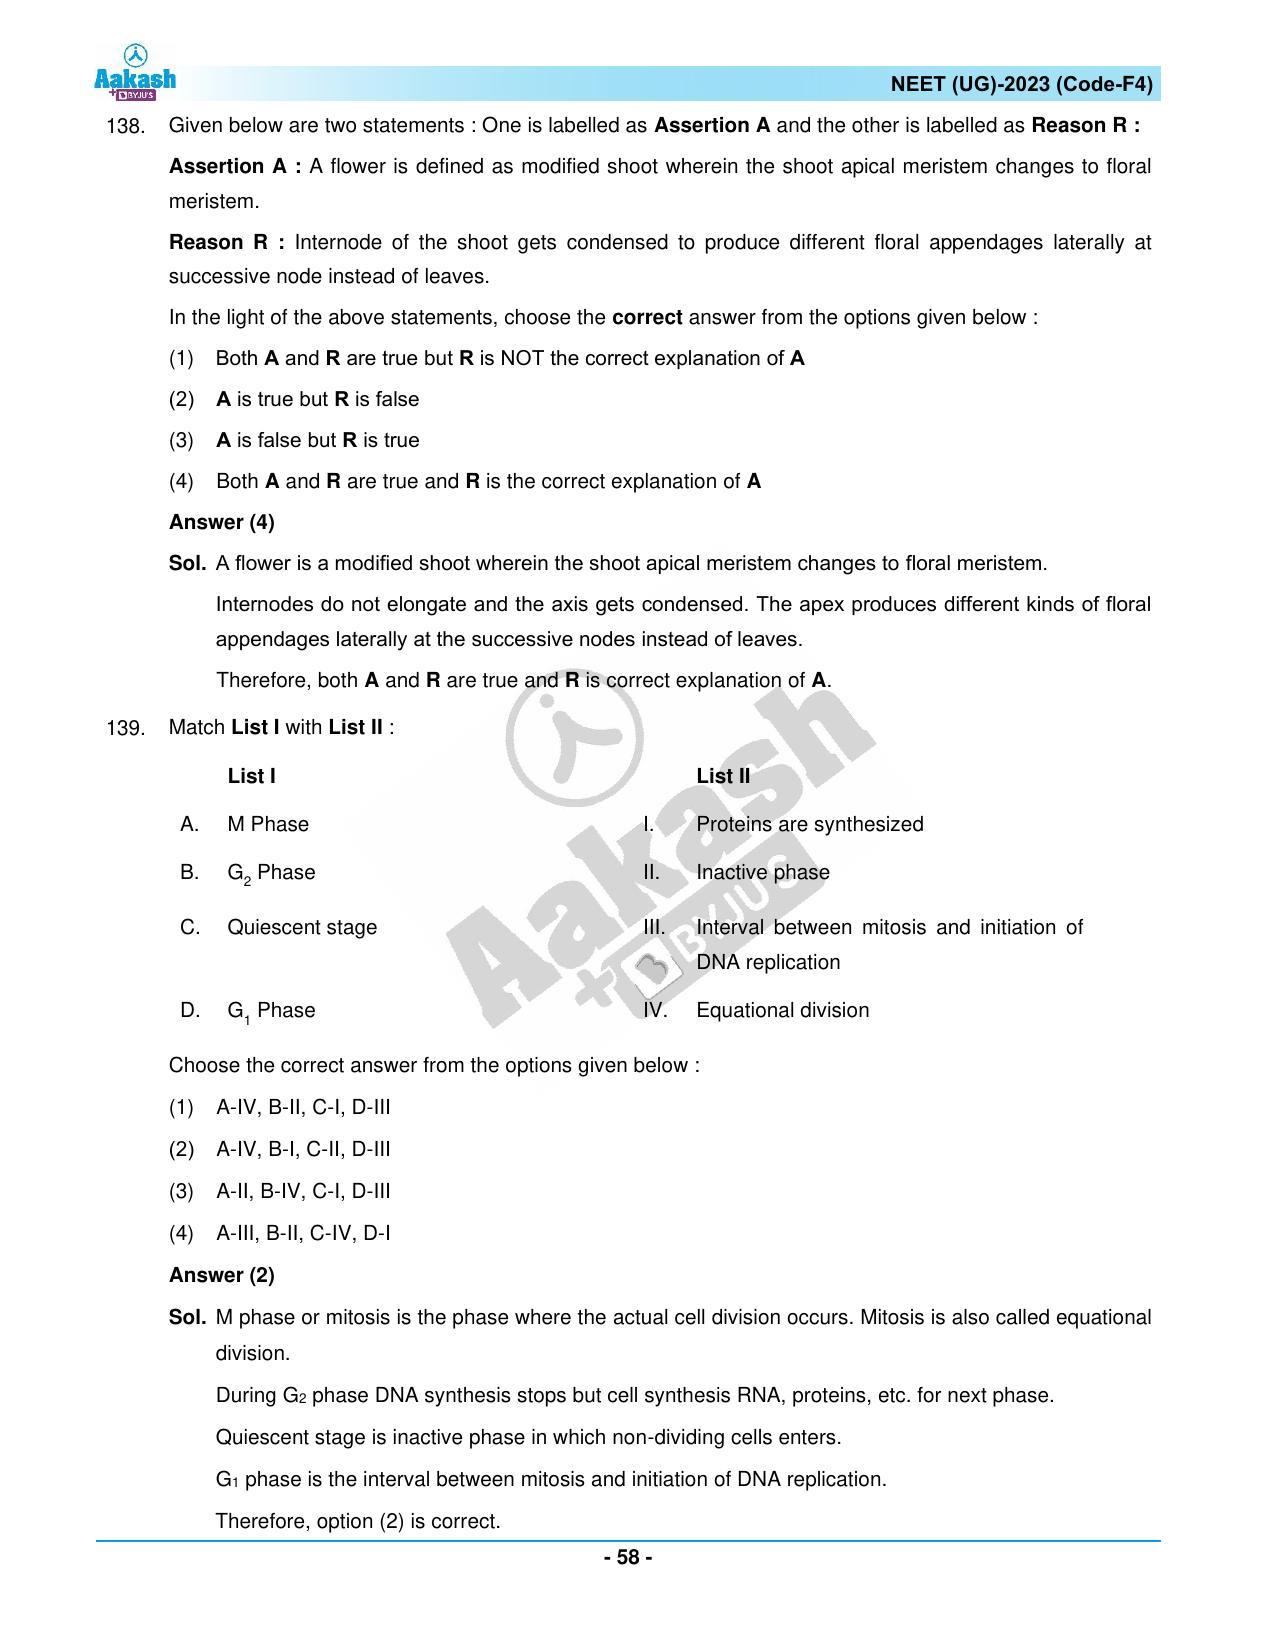 NEET 2023 Question Paper F4 - Page 58